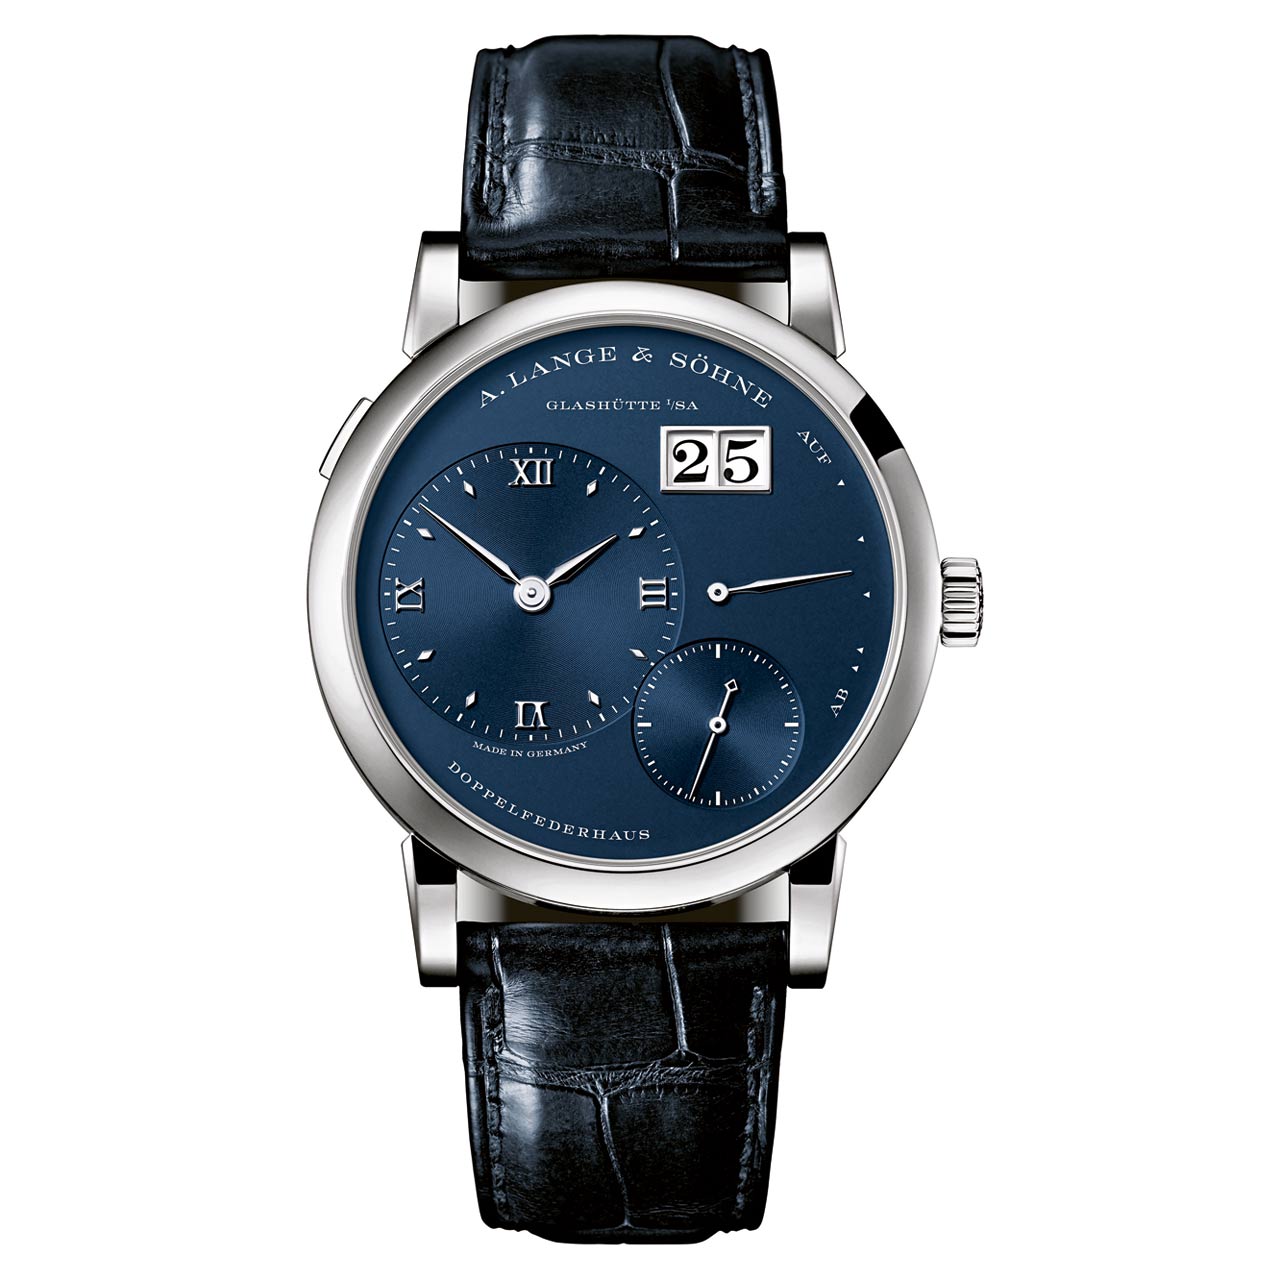 A. Lange & Sohne - Blue Series | Time and Watches | The watch blog